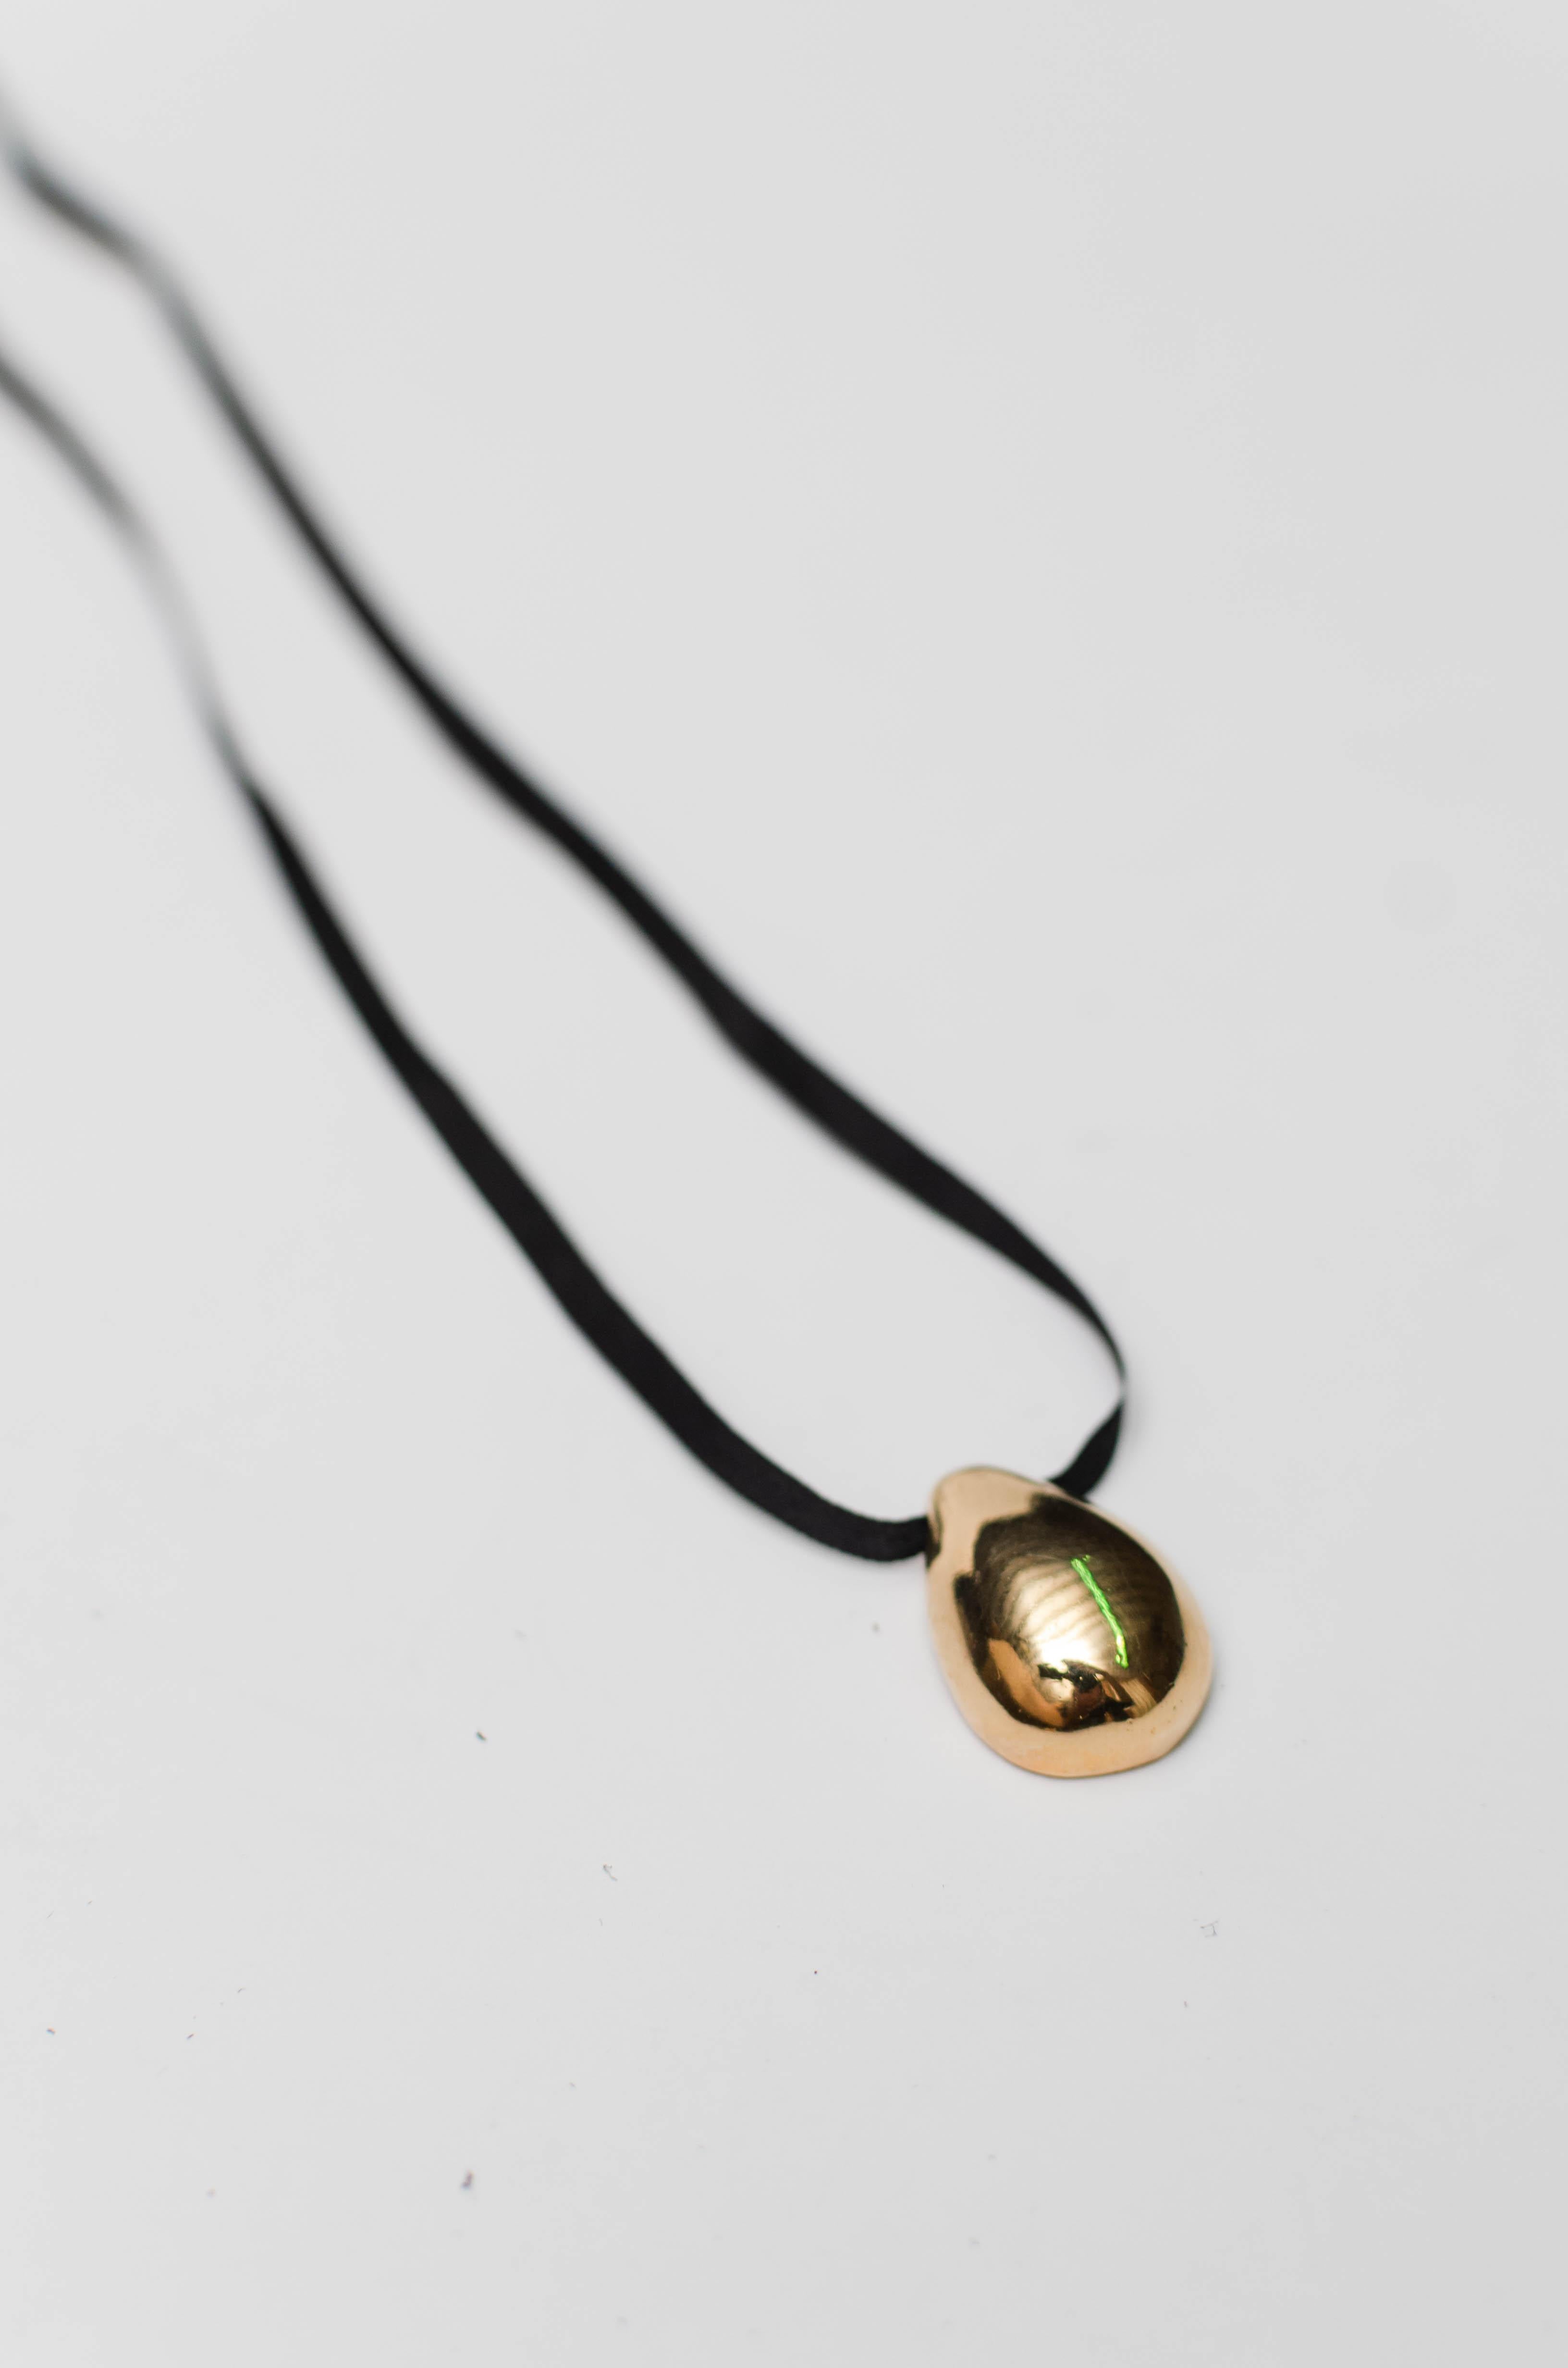 These pieces were designed, hand-carved, and then cast from our workshop in Uruguay.
Beautiful necklace with a delicate gold-plated silver pendant threaded on a black silk lace with gold-plated silver terminals.
All these processes make a truly